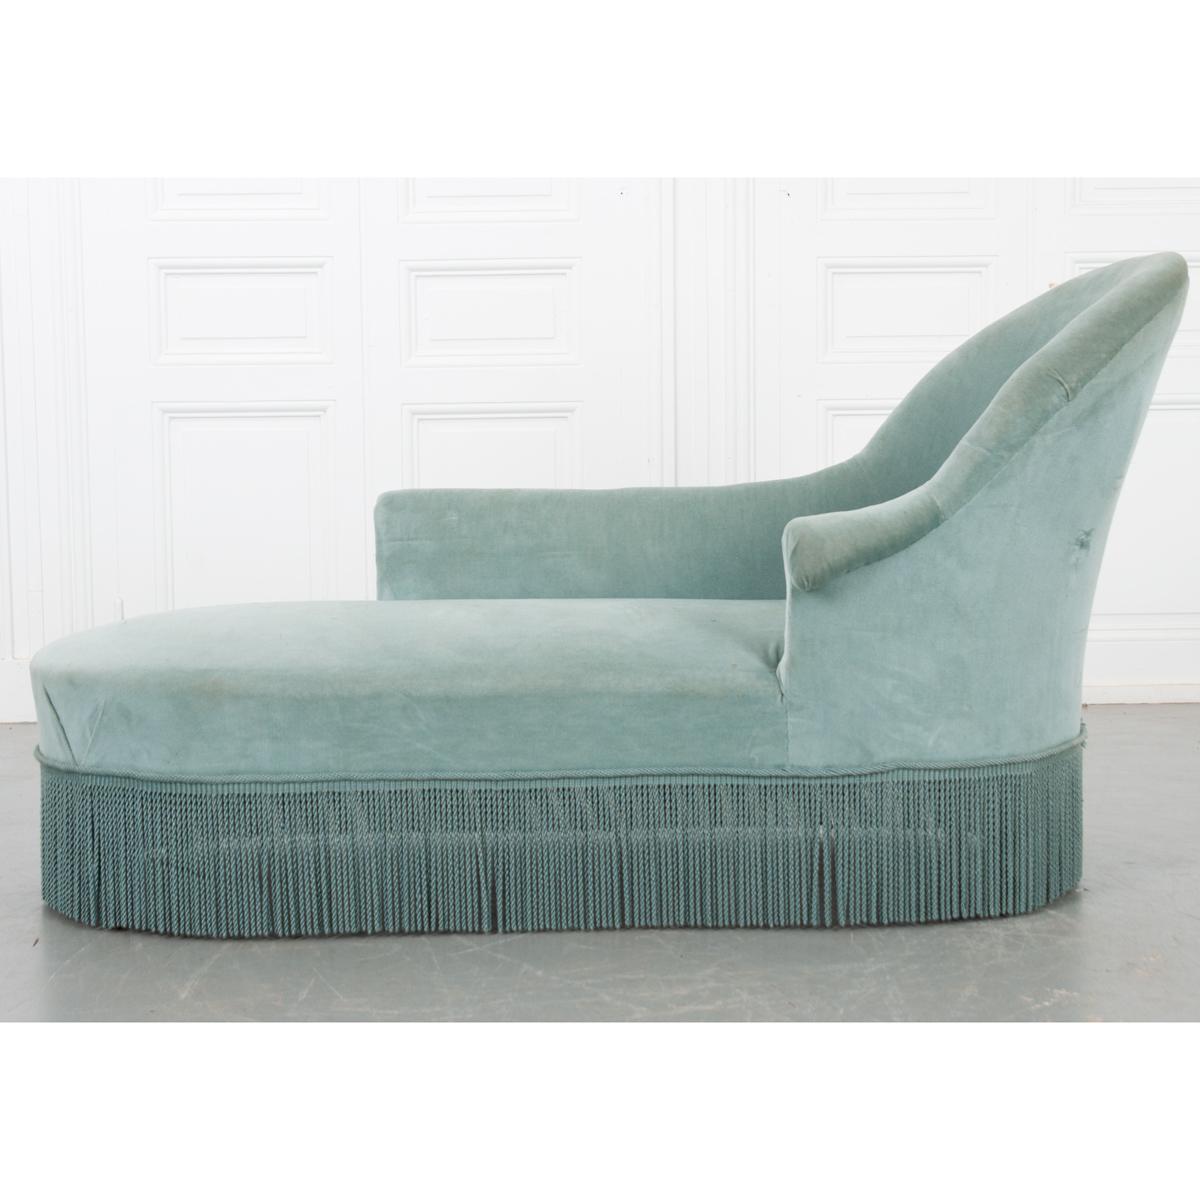 A beautiful light blue velvet chaise with a classic shape and fringe around the bottom to hide the turned wooden feet. The perfect combination of comfort and composition, this chaise would go perfectly in any living space. The upholstery is slightly